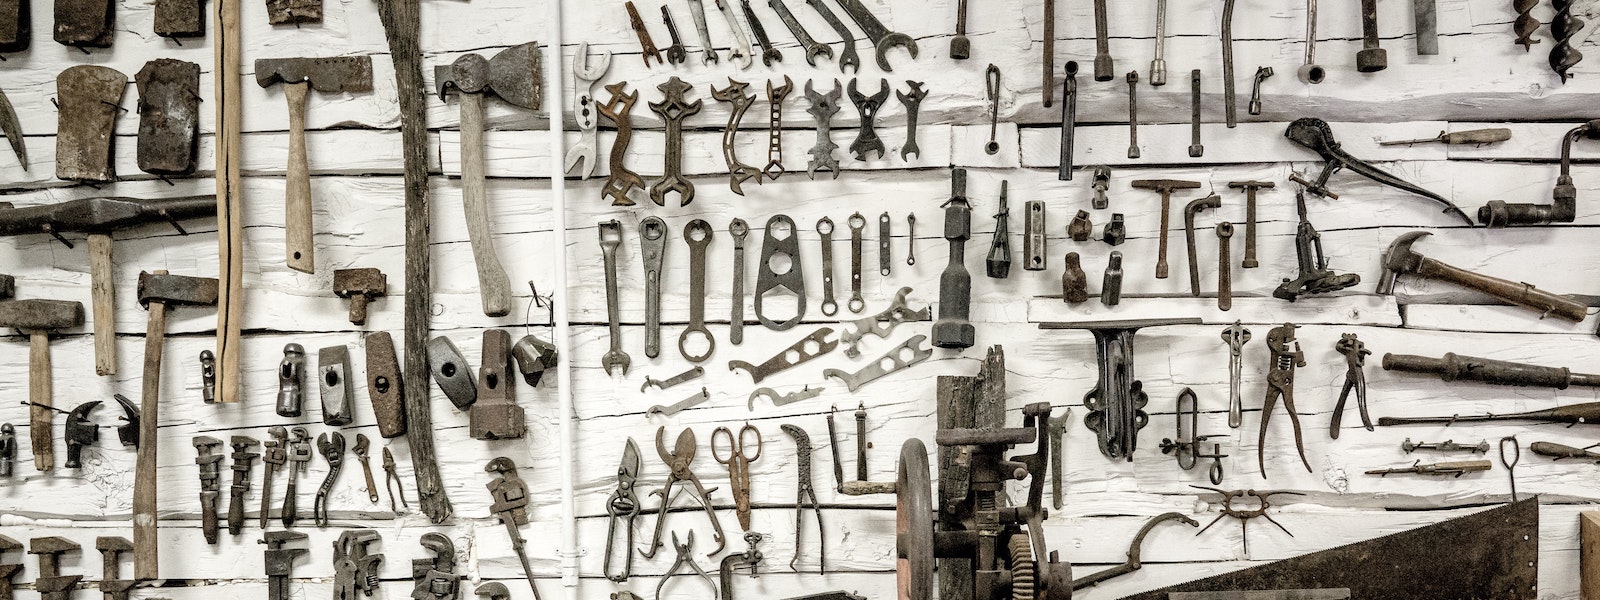 antique tool wall